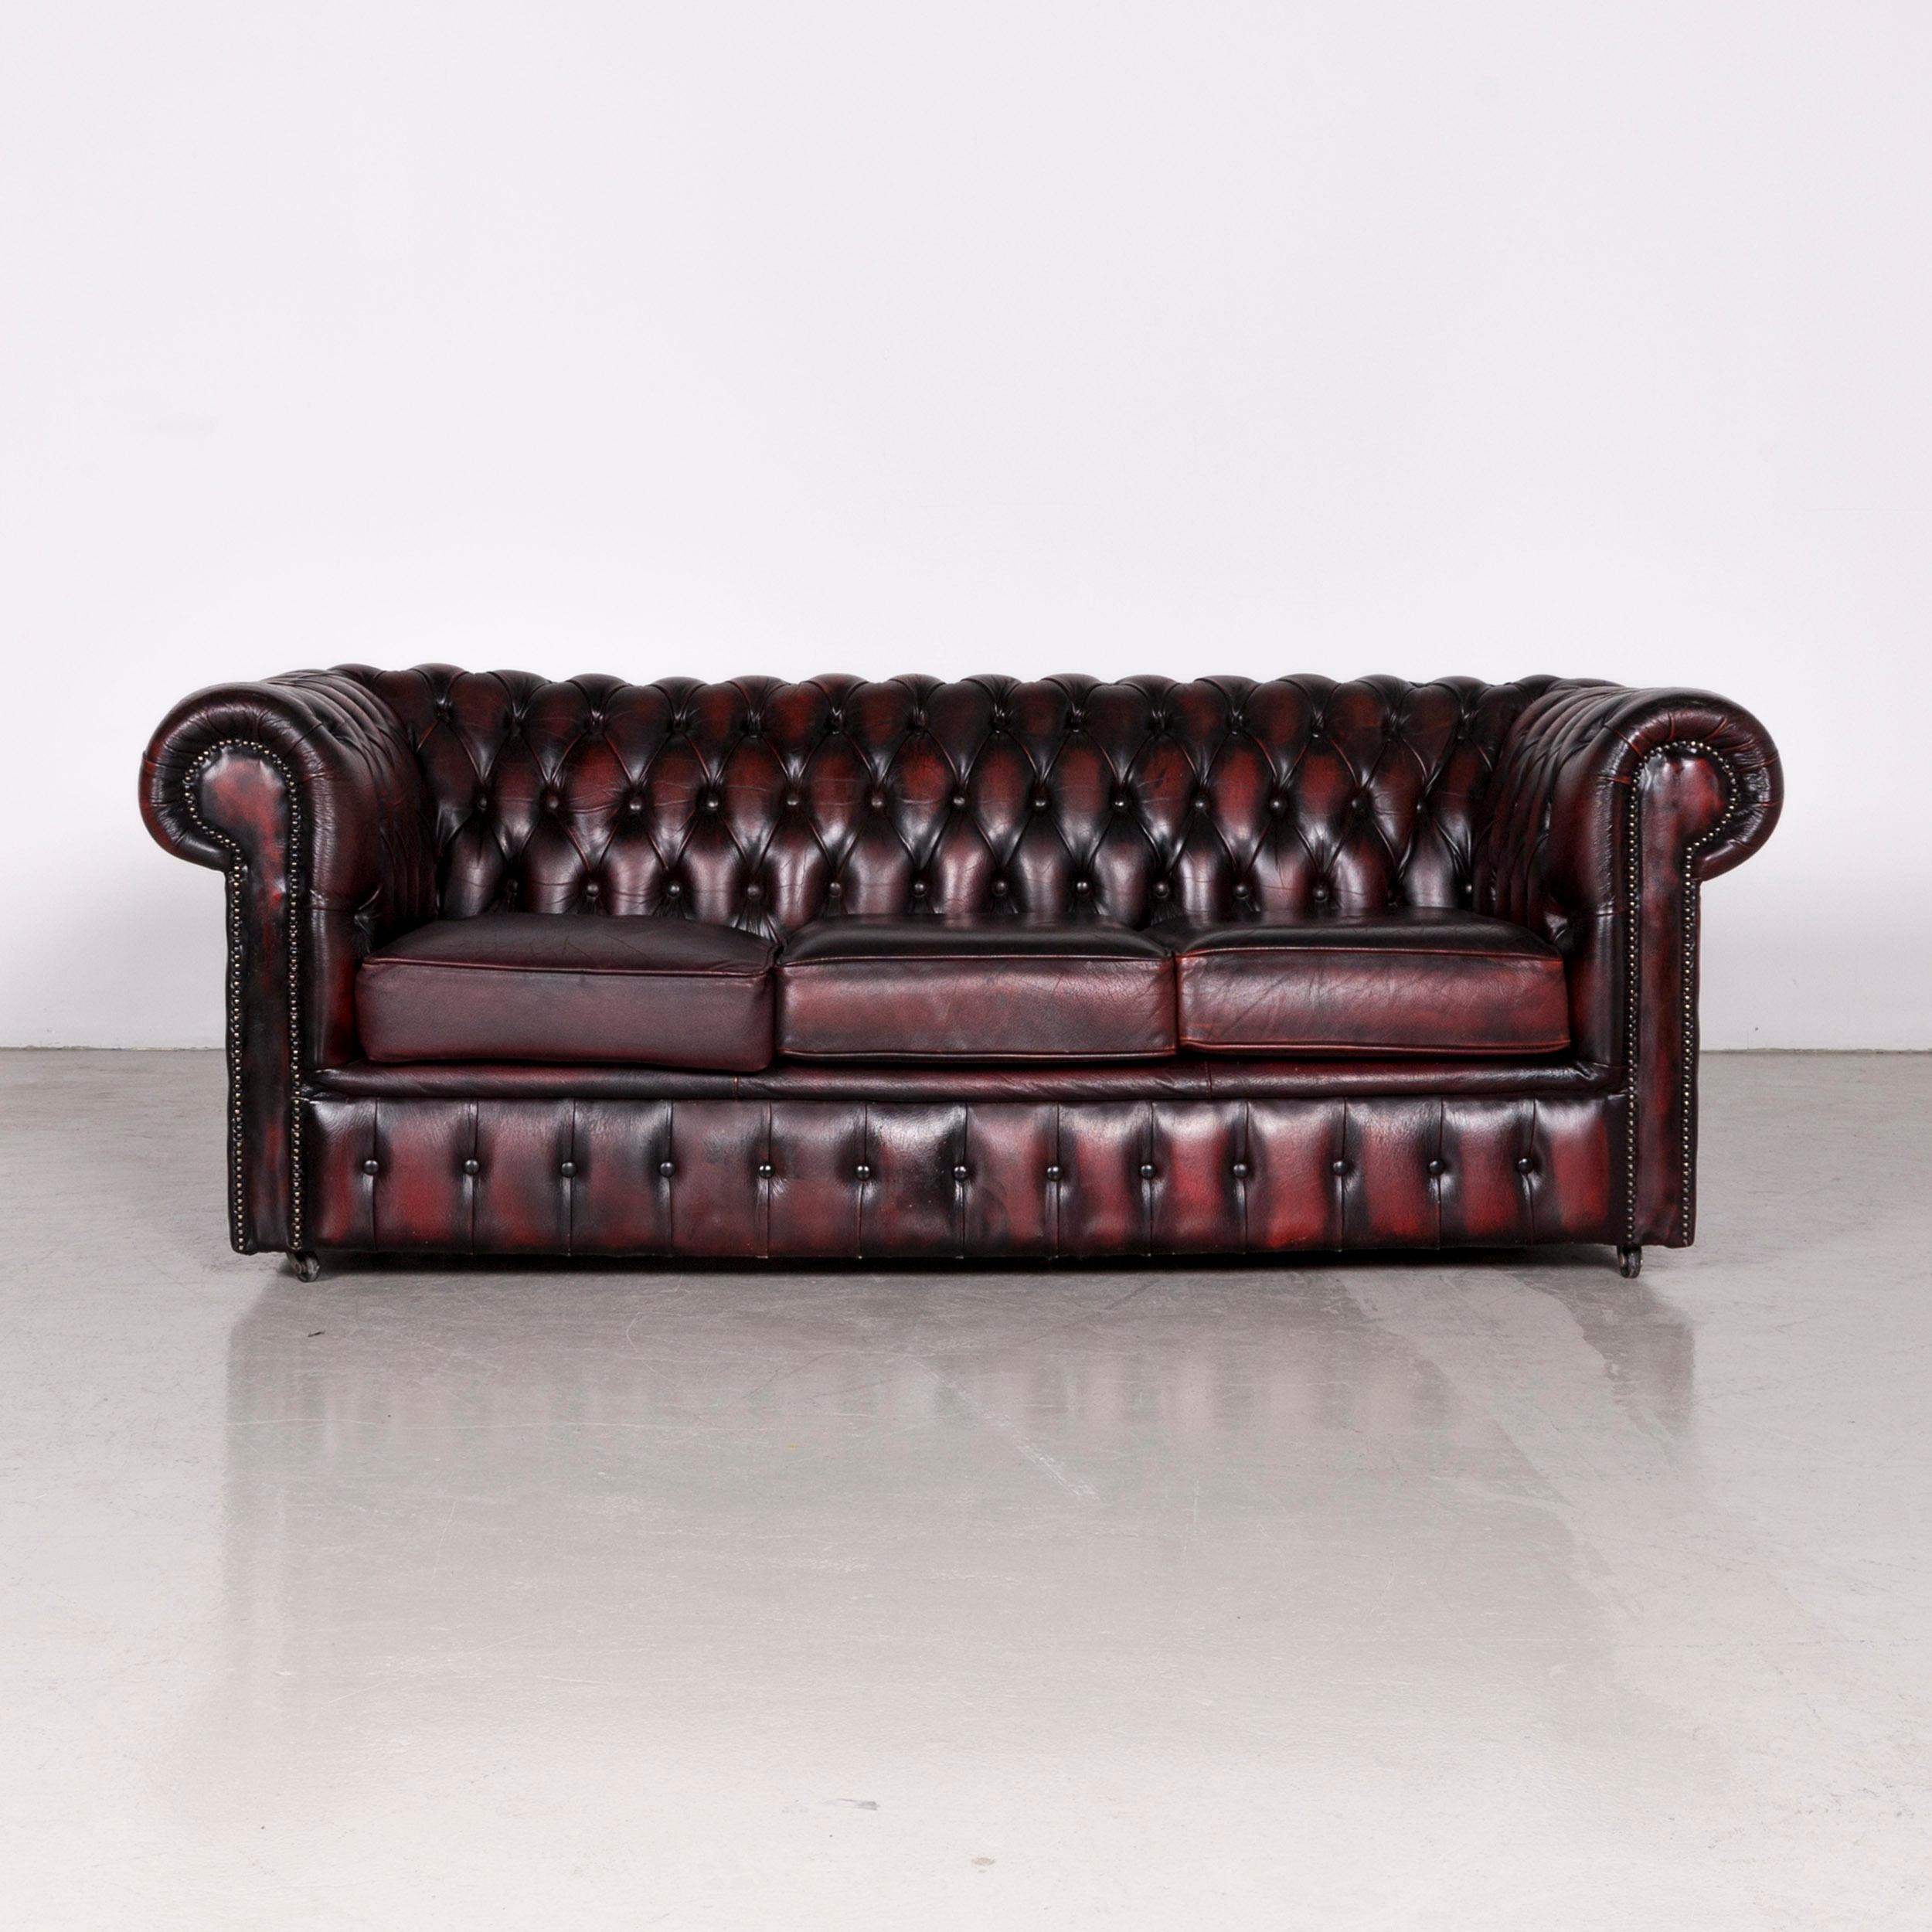 Chesterfield leather sofa set red vintage two-seat couch.